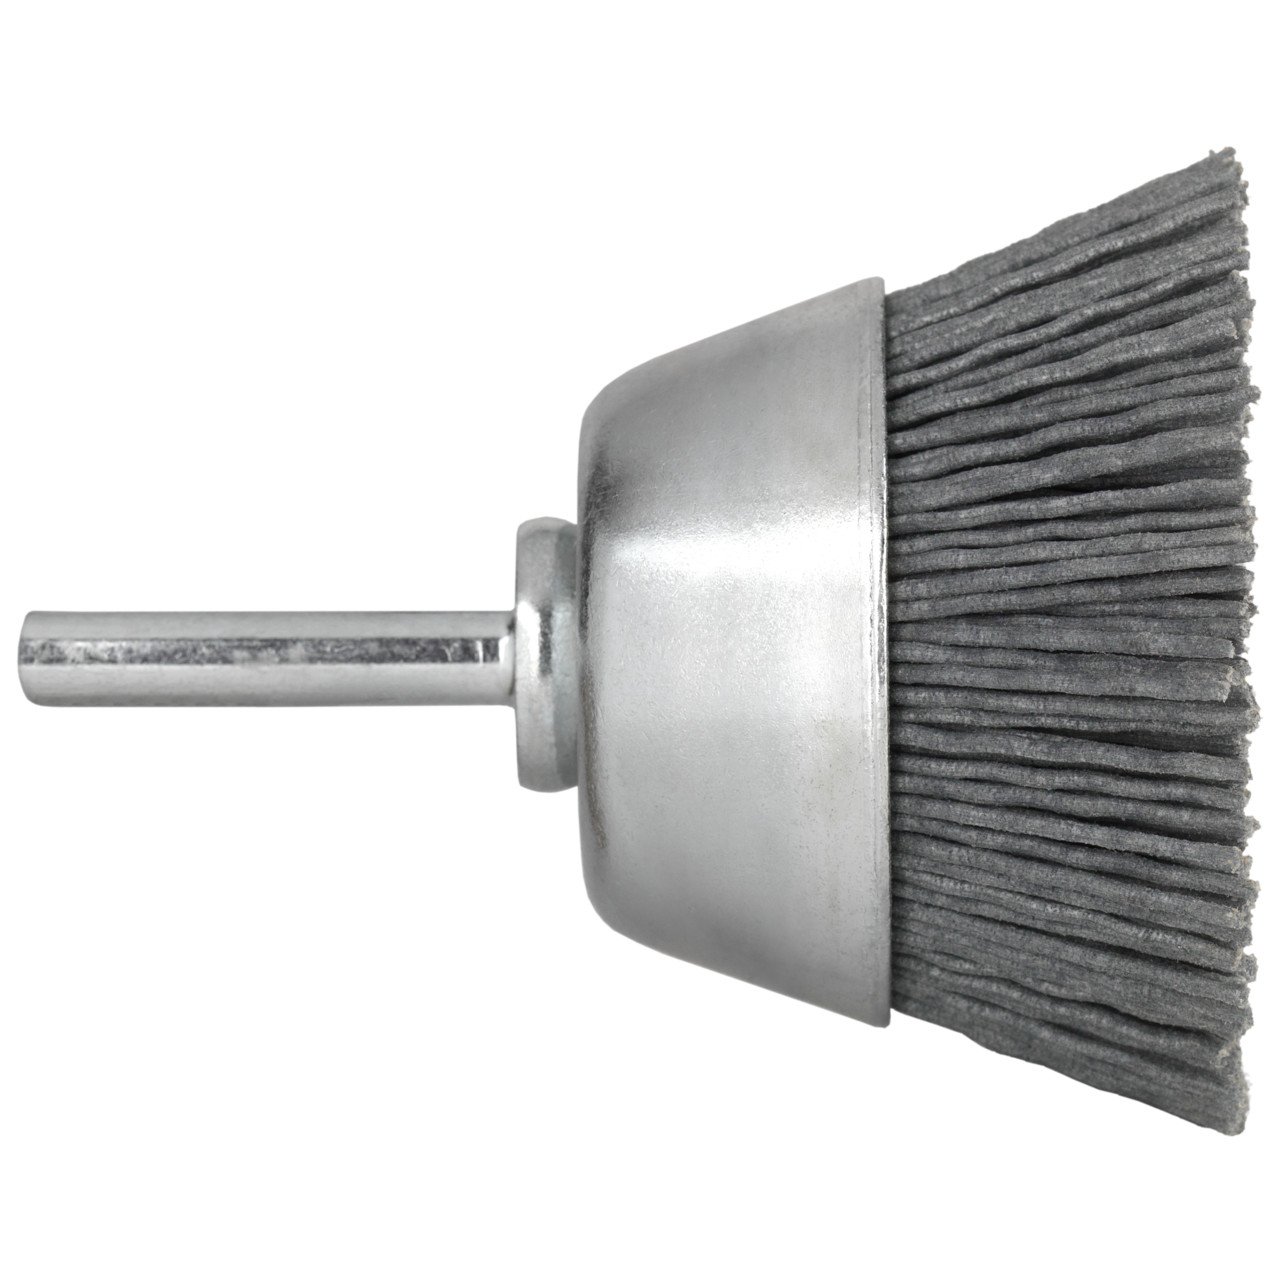 TYROLIT Cup brushes DxLxH-GExI 50x10x20-6x30 For universal use, shape: 52TDK - (cup brushes), Art. 34043177